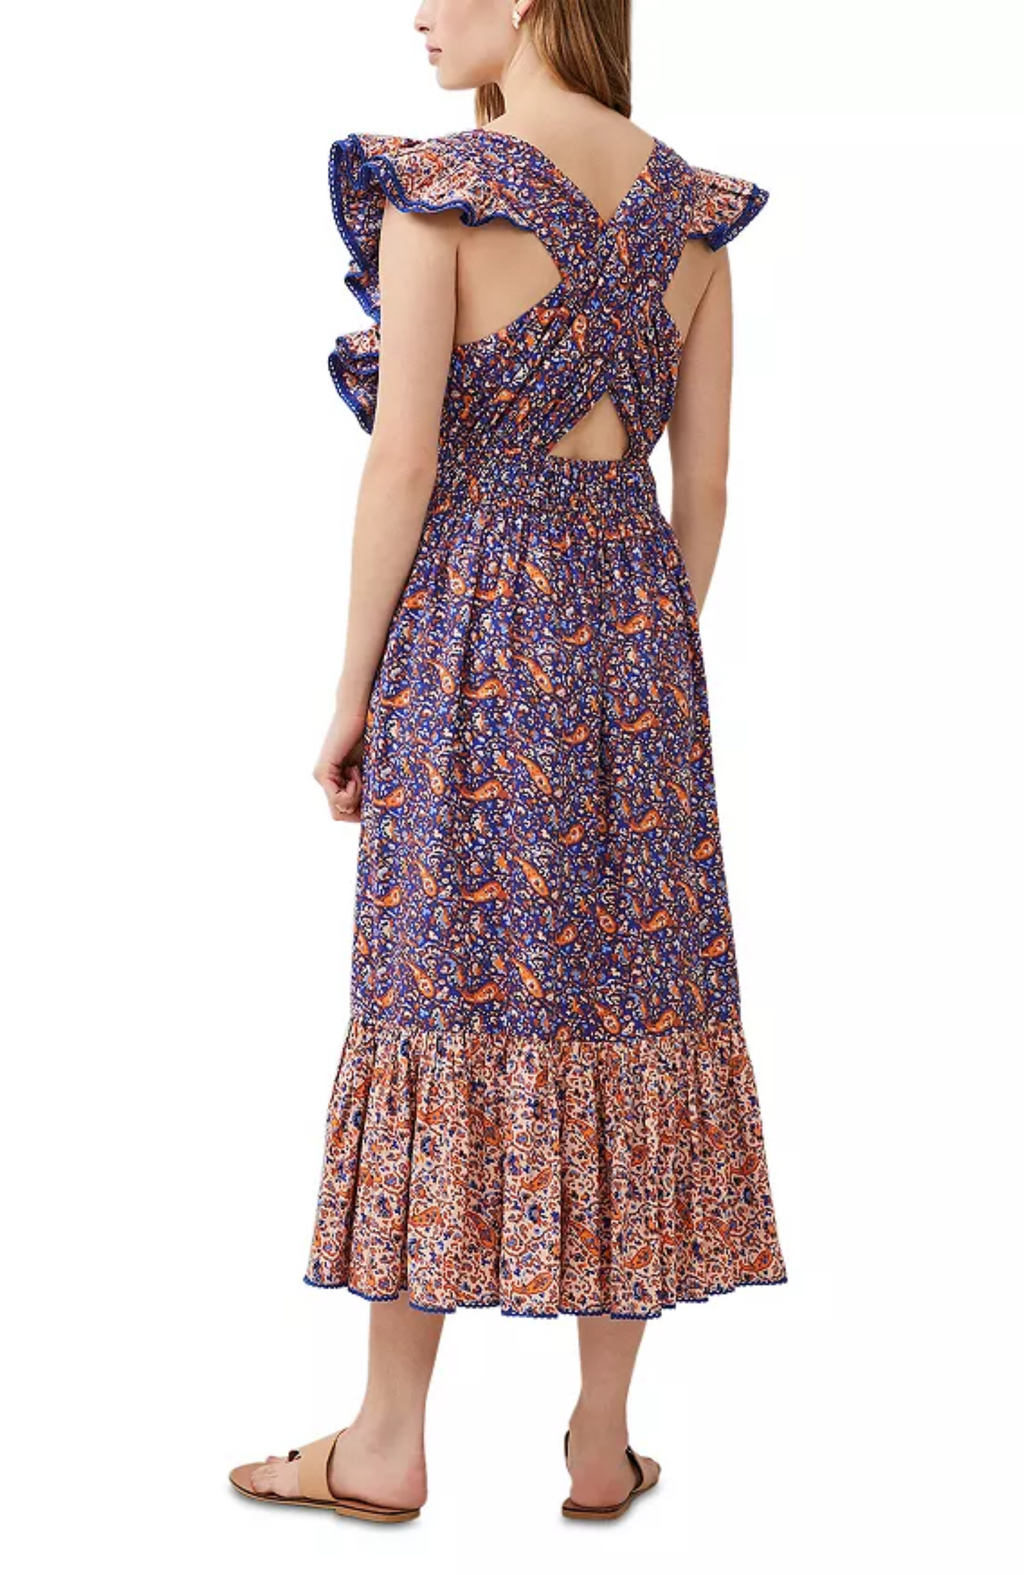 French Connection - Anathia Blaire Dress